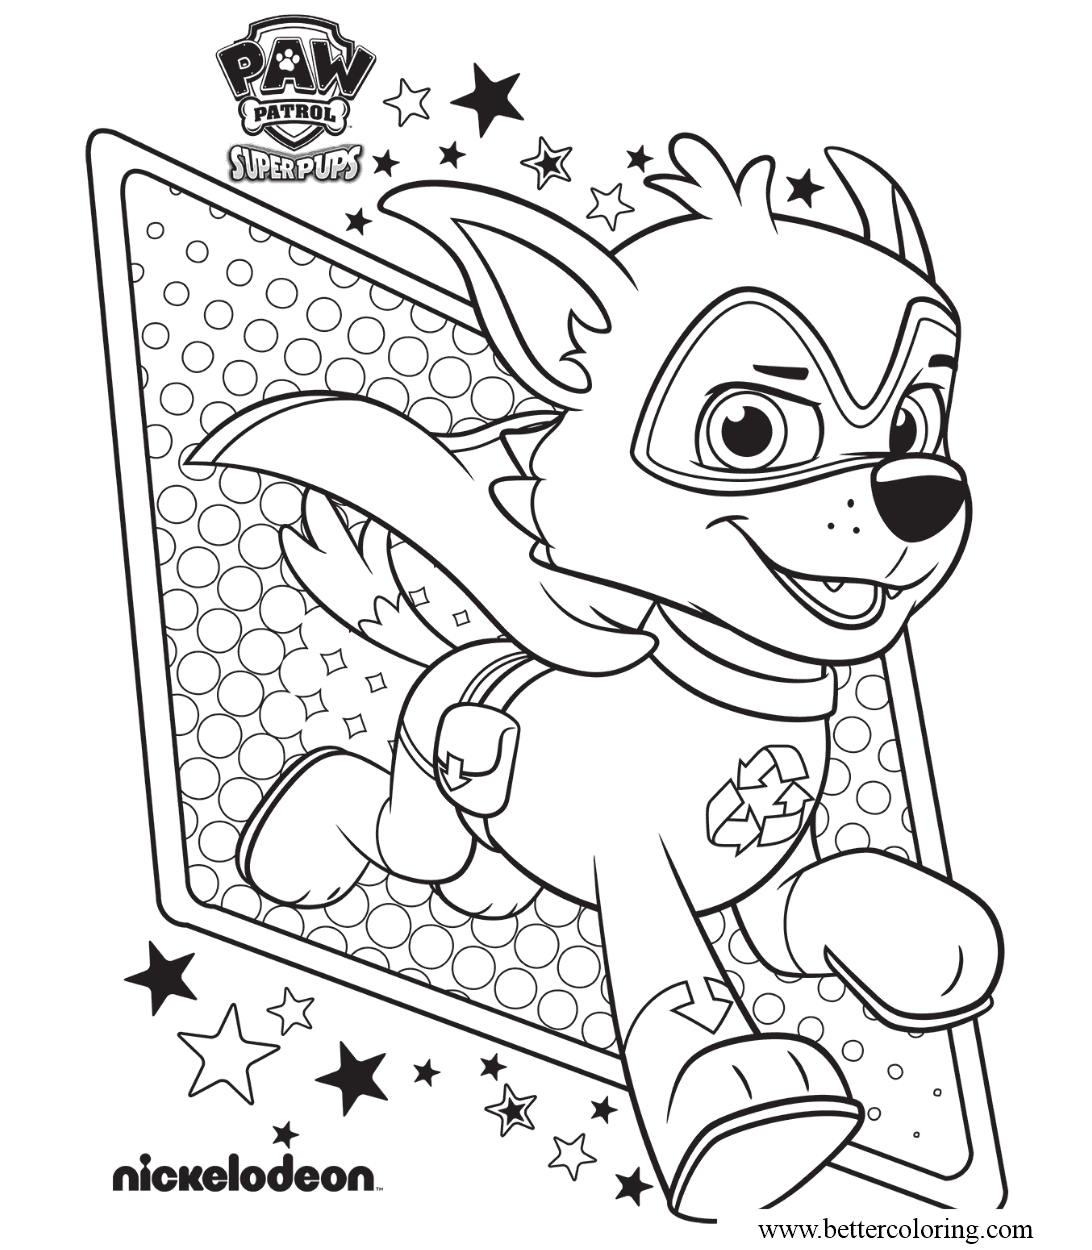 Free Paw Patrol Super Pups Rocky Coloring Pages printable